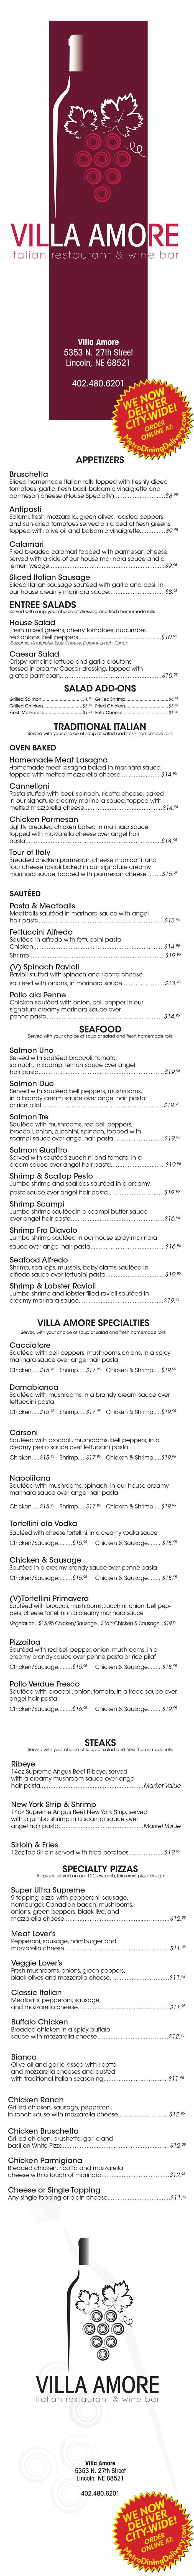 
Villa Amore
Italian Restaurant & Wine Bar

Full Menu
5353 n 27th St
Lincoln, Ne 68521
402.480.6201

APPETIZERS
Bruschetta
Sliced homemade Italian rolls topped with freshly diced
tomatoes, garlic, fresh basil, balsamic vinaigrette and
parmesan cheese (House Specialty)..............................$8.95
Antipasti
Salami, fresh mozzarella, green olives, roasted peppers
and sun-dried tomatoes served on a bed of fresh greens
topped with olive oil and balsamic vinaigrette...............$9.95
Calamari
Fired breaded calamari topped with parmesan cheese
served with a side of our house marinara sauce and a
lemon wedge....................................................................$9.95
Sliced Italian Sausage
Sliced Italian sausage sautéed with garlic and basil in
our house creamy marinara sauce.................................$8.95
ENTREE SALADS
Served with soup, your choice of dressing and fresh homemade rolls
House Salad
Fresh mixed greens, cherry tomatoes, cucumber,
red onions, bell peppers.................................................$10.95
-Balsamic Vinaigrette, Blue Cheese, Dorothy Lynch, Ranch
Caesar Salad
Crispy romaine lettuce and garlic croutons
tossed in creamy Caesar dressing, topped with
grated parmesan............................................................$10.95

SALAD ADD-ONS
Grilled Salmon...............................$4.75
Grilled Chicken..............................$3.75
Fresh Mozzarella.............................$1.75
Grilled Shrimp.................................$4.75
Fried Chicken.................................$3.75
Feta Cheese....................................$1.75

TRADITIONAL ITALIAN
Served with your choice of soup or salad and fresh homemade rolls
OVEN BAKED
Homemade Meat Lasagna
Homemade meat lasagna baked in marinara sauce,
topped with melted mozzarella cheese........................$14.95
Cannelloni
Pasta stuffed with beef, spinach, ricotta cheese, baked
in our signature creamy marinara sauce, topped with
melted mozzarella cheese..............................................$14.95
Chicken Parmesan
Lightly breaded chicken baked in marinara sauce,
topped with mozzarella cheese over angel hair
pasta................................................................................$14.95
Tour of Italy
Breaded chicken parmesan, cheese manicotti, and
four cheese ravioli baked in our signature creamy
marinara sauce, topped with parmesan cheese.........$15.95
SAUTÉED
Pasta & Meatballs
Meatballs sautéed in marinara sauce with angel
hair pasta..........................................................................$13.95
Fettuccini Alfredo
Sautéed in alfredo with fettuccini pasta
Chicken.............................................................................$14.95
Shrimp................................................................................$19.95
(V) Spinach Ravioli
Ravioli stuffed with spinach and ricotta cheese
sautéed with onions, in marinara sauce.........................$13.95
Pollo ala Penne
Chicken sautéed with onion, bell pepper in our
signature creamy marinara sauce over
penne pasta.....................................................................$14.95
SEAFOOD
Served with your choice of soup or salad and fresh homemade rolls
Salmon Uno
Served with sautéed broccoli, tomato,
spinach, in scampi lemon sauce over angel
hair pasta..........................................................................$19.95
Salmon Due
Served with sautéed bell peppers, mushrooms,
in a brandy cream sauce over angel hair pasta
or rice pilaf........................................................................$19.95
Salmon Tre
Sautéed with mushrooms, red bell peppers,
broccoli, onion, zucchini, spinach, topped with
scampi sauce over angel hair pasta..............................$19.95
Salmon Quattro
Served with sautéed zucchini and tomato, in a
cream sauce over angel hair pasta................................$19.95
Shrimp & Scallop Pesto
Jumbo shrimp and scallops sautéed in a creamy
pesto sauce over angel hair pasta.................................$19.95
Shrimp Scampi
Jumbo shrimp sautéedin a scampi butter sauce
over angel hair pasta.......................................................$16.95
Shrimp Fra Diavolo
Jumbo shrimp sautéed in our house spicy marinara
sauce over angel hair pasta............................................$16.95
Seafood Alfredo
Shrimp, scallops, mussels, baby clams sautéed in
alfredo sauce over fettucini pasta...................................$19.95
Shrimp & Lobster Ravioli
Jumbo shrimp and lobster filled ravioli sautéed in
creamy marinara sauce..................................................$19.95
VILLA AMORE SPECIALTIES
Served with your choice of soup or salad and fresh homemade rolls
Cacciatore
Sautéed with bell peppers, mushrooms,onions, in a spicy marinara sauce over angel hair pasta
Chicken.....$15.95 Shrimp.....$17.95 Chicken & Shrimp.....$19.95
Damabianca
Sautéed with mushrooms in a brandy cream sauce over fettuccini pasta
Chicken.....$15.95 Shrimp.....$17.95 Chicken & Shrimp.....$19.95
Carsoni
Sautéed with broccoli, mushrooms, bell peppers, in a creamy pesto sauce over fettuccini pasta
Chicken.....$15.95 Shrimp.....$17.95 Chicken & Shrimp.....$19.95
Napolitana
Sautéed with mushrooms, spinach, in our house creamy marinara sauce over angel hair pasta
Chicken.....$15.95 Shrimp.....$17.95 Chicken & Shrimp.....$19.95
Tortellini ala Vodka
Sautéed with cheese tortellini, in a creamy vodka sauce
Chicken/Sausage.........$15.95 Chicken & Sausage.........$18.95
Chicken & Sausage
Sautéed in a creamy brandy sauce over penne pasta
Chicken/Sausage.........$15.95 Chicken & Sausage.........$18.95
(V)Tortellini Primavera
Sautéed with broccoli, mushrooms, zucchini, onion, bell peppers, cheese tortellini in a creamy marinara sauce
Vegetarian...$15.95 Chicken/Sausage...$16.95 Chicken & Sausage...$19.95
Pizzailoa
Sautéed with red bell pepper, onion, mushrooms, in a creamy brandy sauce over penne pasta or rice pilaf
Chicken/Sausage.........$15.95 Chicken & Sausage.........$18.95
Pollo Verdue Fresco
Sautéed with broccoli, onion, tomato, in alfredo sauce over angel hair pasta
Chicken/Sausage.........$16.95 Chicken & Sausage.........$19.95

STEAKS
Served with your choice of soup or salad and fresh homemade rolls
Ribeye
14oz Supreme Angus Beef Ribeye, served
with a creamy mushroom sauce over angel
hair pasta.............................................................Market Value
New York Strip & Shrimp
14oz Supreme Angus Beef New York Strip, served
with a jumbo shrimp in a scampi sauce over
angel hair pasta..................................................Market Value
Sirloin & Fries
12oz Top Sirloin served with fried potatoes.....................$19.95
SPECIALTY PIZZAS
All pizzas served on our 12”, low carb, thin crust pizza dough
Super Ultra Supreme
9 topping pizza with pepperoni, sausage,
hamburger, Canadian bacon, mushrooms,
onions, green peppers, black live, and
mozzarella cheese...............................................$12.95
Meat Lover’s
Pepperoni, sausage, hamburger and
mozzarella cheese...............................................$11.95
Veggie Lover’s
Fresh mushrooms, onions, green peppers,
black olives and mozzarella cheese....................$11.95
Classic Italian
Meatballs, pepperoni, sausage,
and mozzarella cheese.......................................$11.95
Buffalo Chicken
Breaded chicken in a spicy buffalo
sauce with mozzarella cheese...........................$12.95
Bianca
Olive oil and garlic kissed with ricotta
and mozzarella cheeses and dusted
with traditional Italian seasoning.......................$11.95
Chicken Ranch
Grilled chicken, sausage, pepperoni,
in ranch sause with mozzarella cheese..............................$12.95
Chicken Bruschetta
Grilled chicken, brushetta, garlic and
basil on White Pizza...............................................................$12.95
Chicken Parmigiana
Breaded chicken, ricotta and mozzarella
cheese with a touch of marinara........................................$12.95
Cheese or Single Topping
Any single topping or plain cheese.....................................$11.95

*Gluten Free Pasta available upon request
**Split Plate/Sharing Charge of $4.75 that includes an extra soup or salad
CONSUMER ADVISORY:
Thoroughly cooking foods of animal origin, such as beef, eggs, fish, lamb, pork,
poultry or shellfish reduces the risk of food-borne illness.



